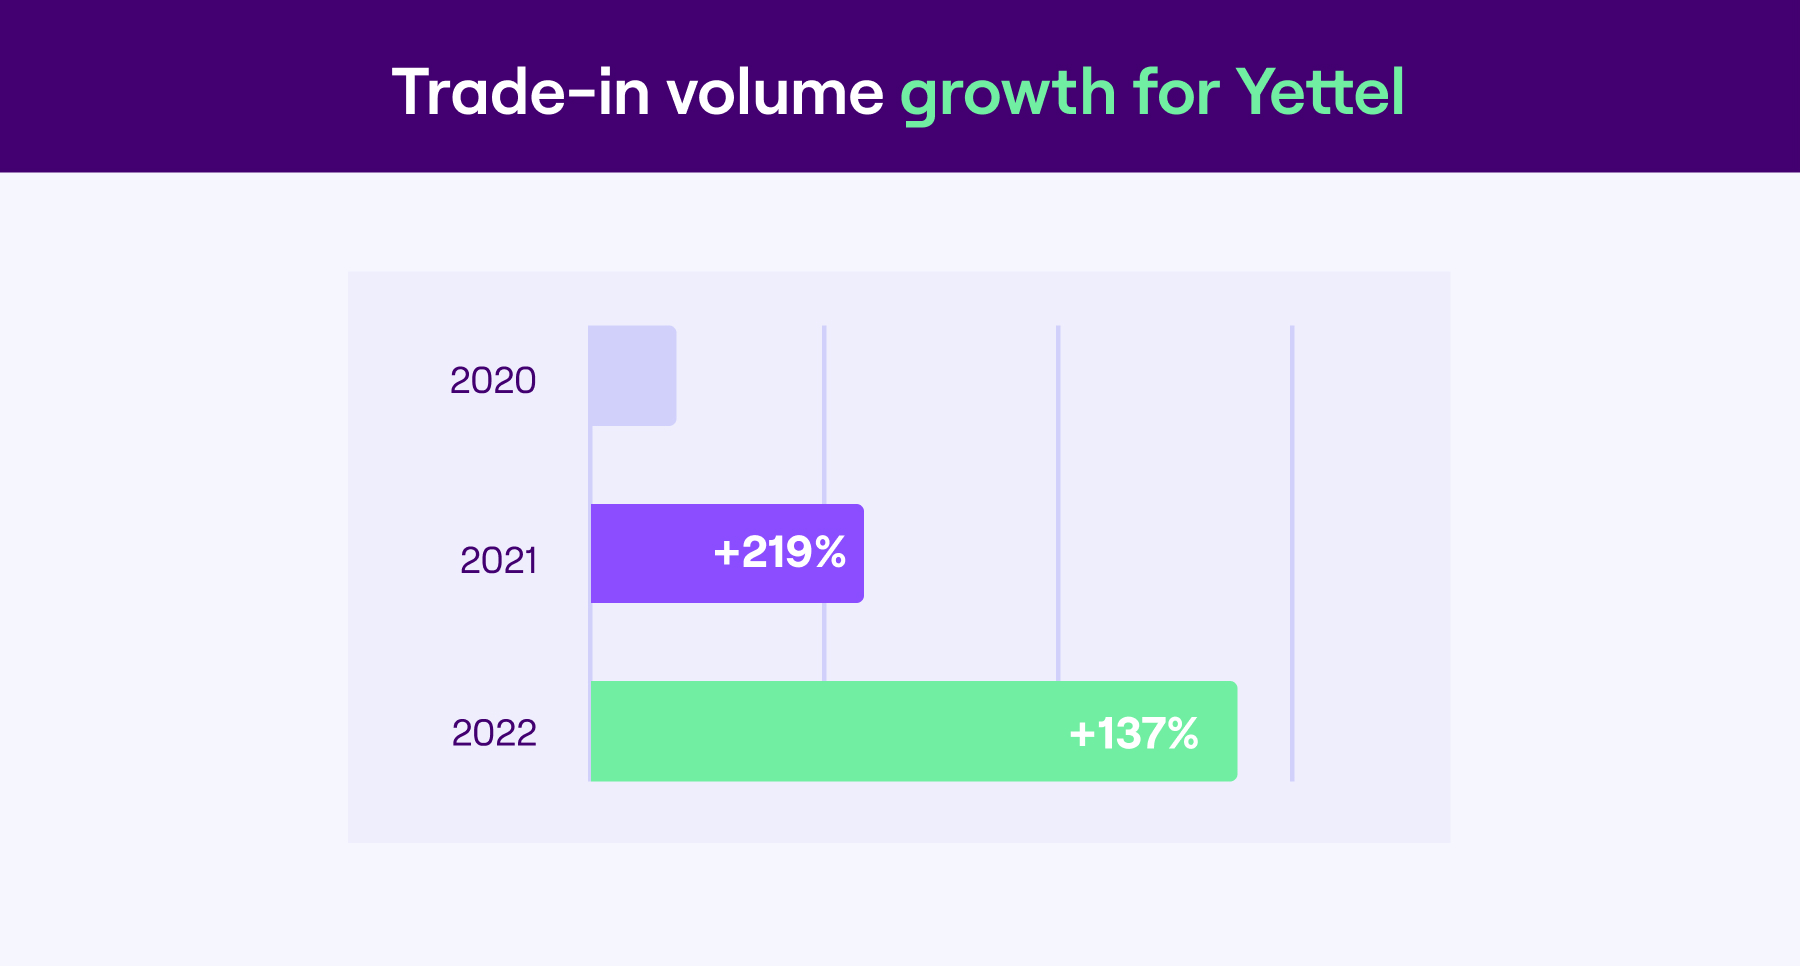 Yettel bulgaria trade-in has grown significantly using the electronic device buyback platform from Foxway.